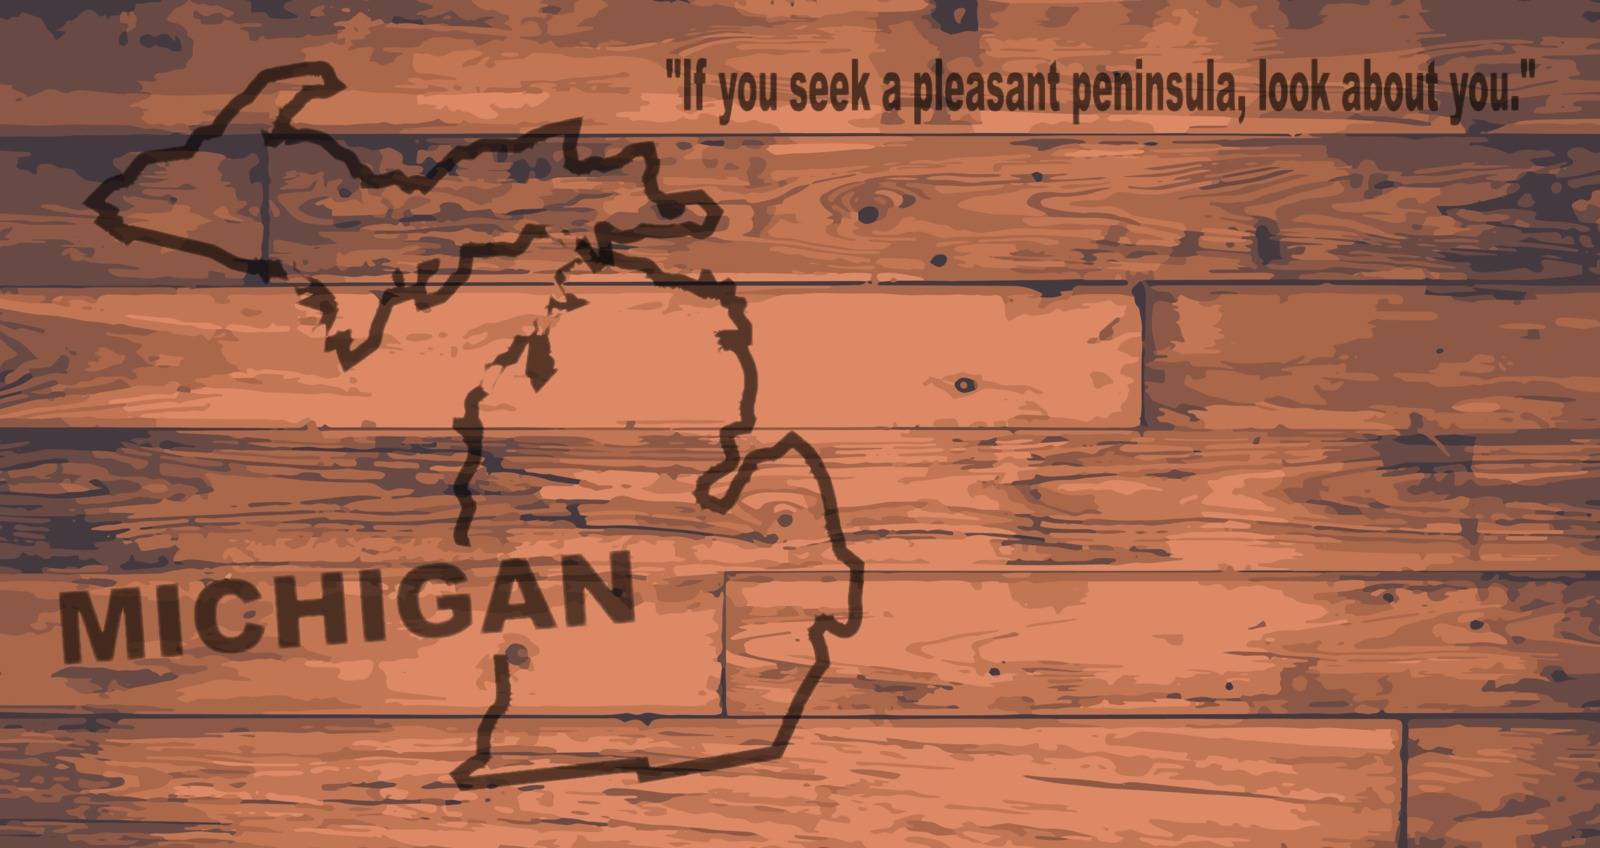 Michigan state map brand on wooden boards with map outline and state motto